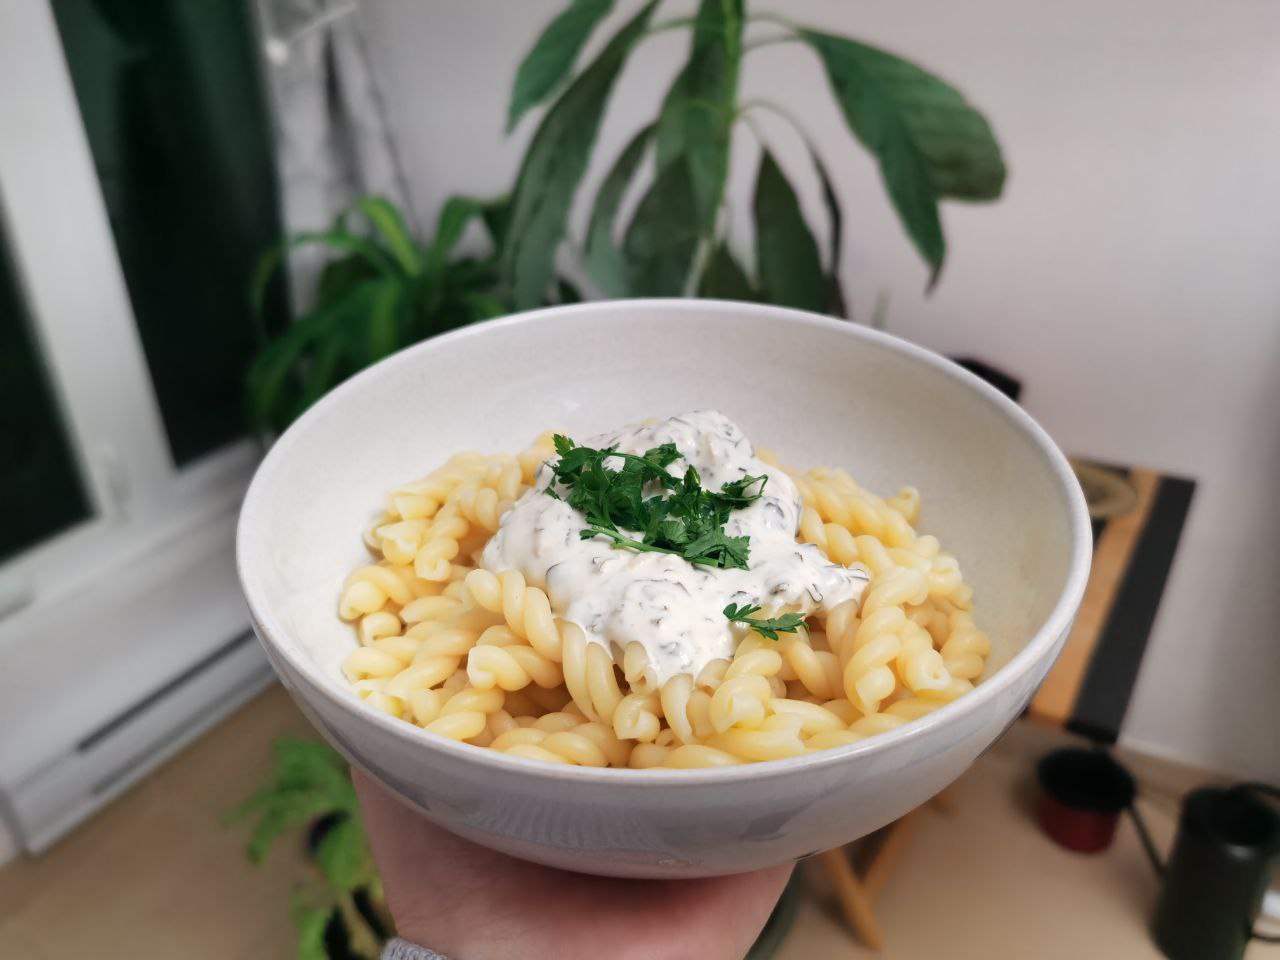 Lemon Pasta with plants in the background